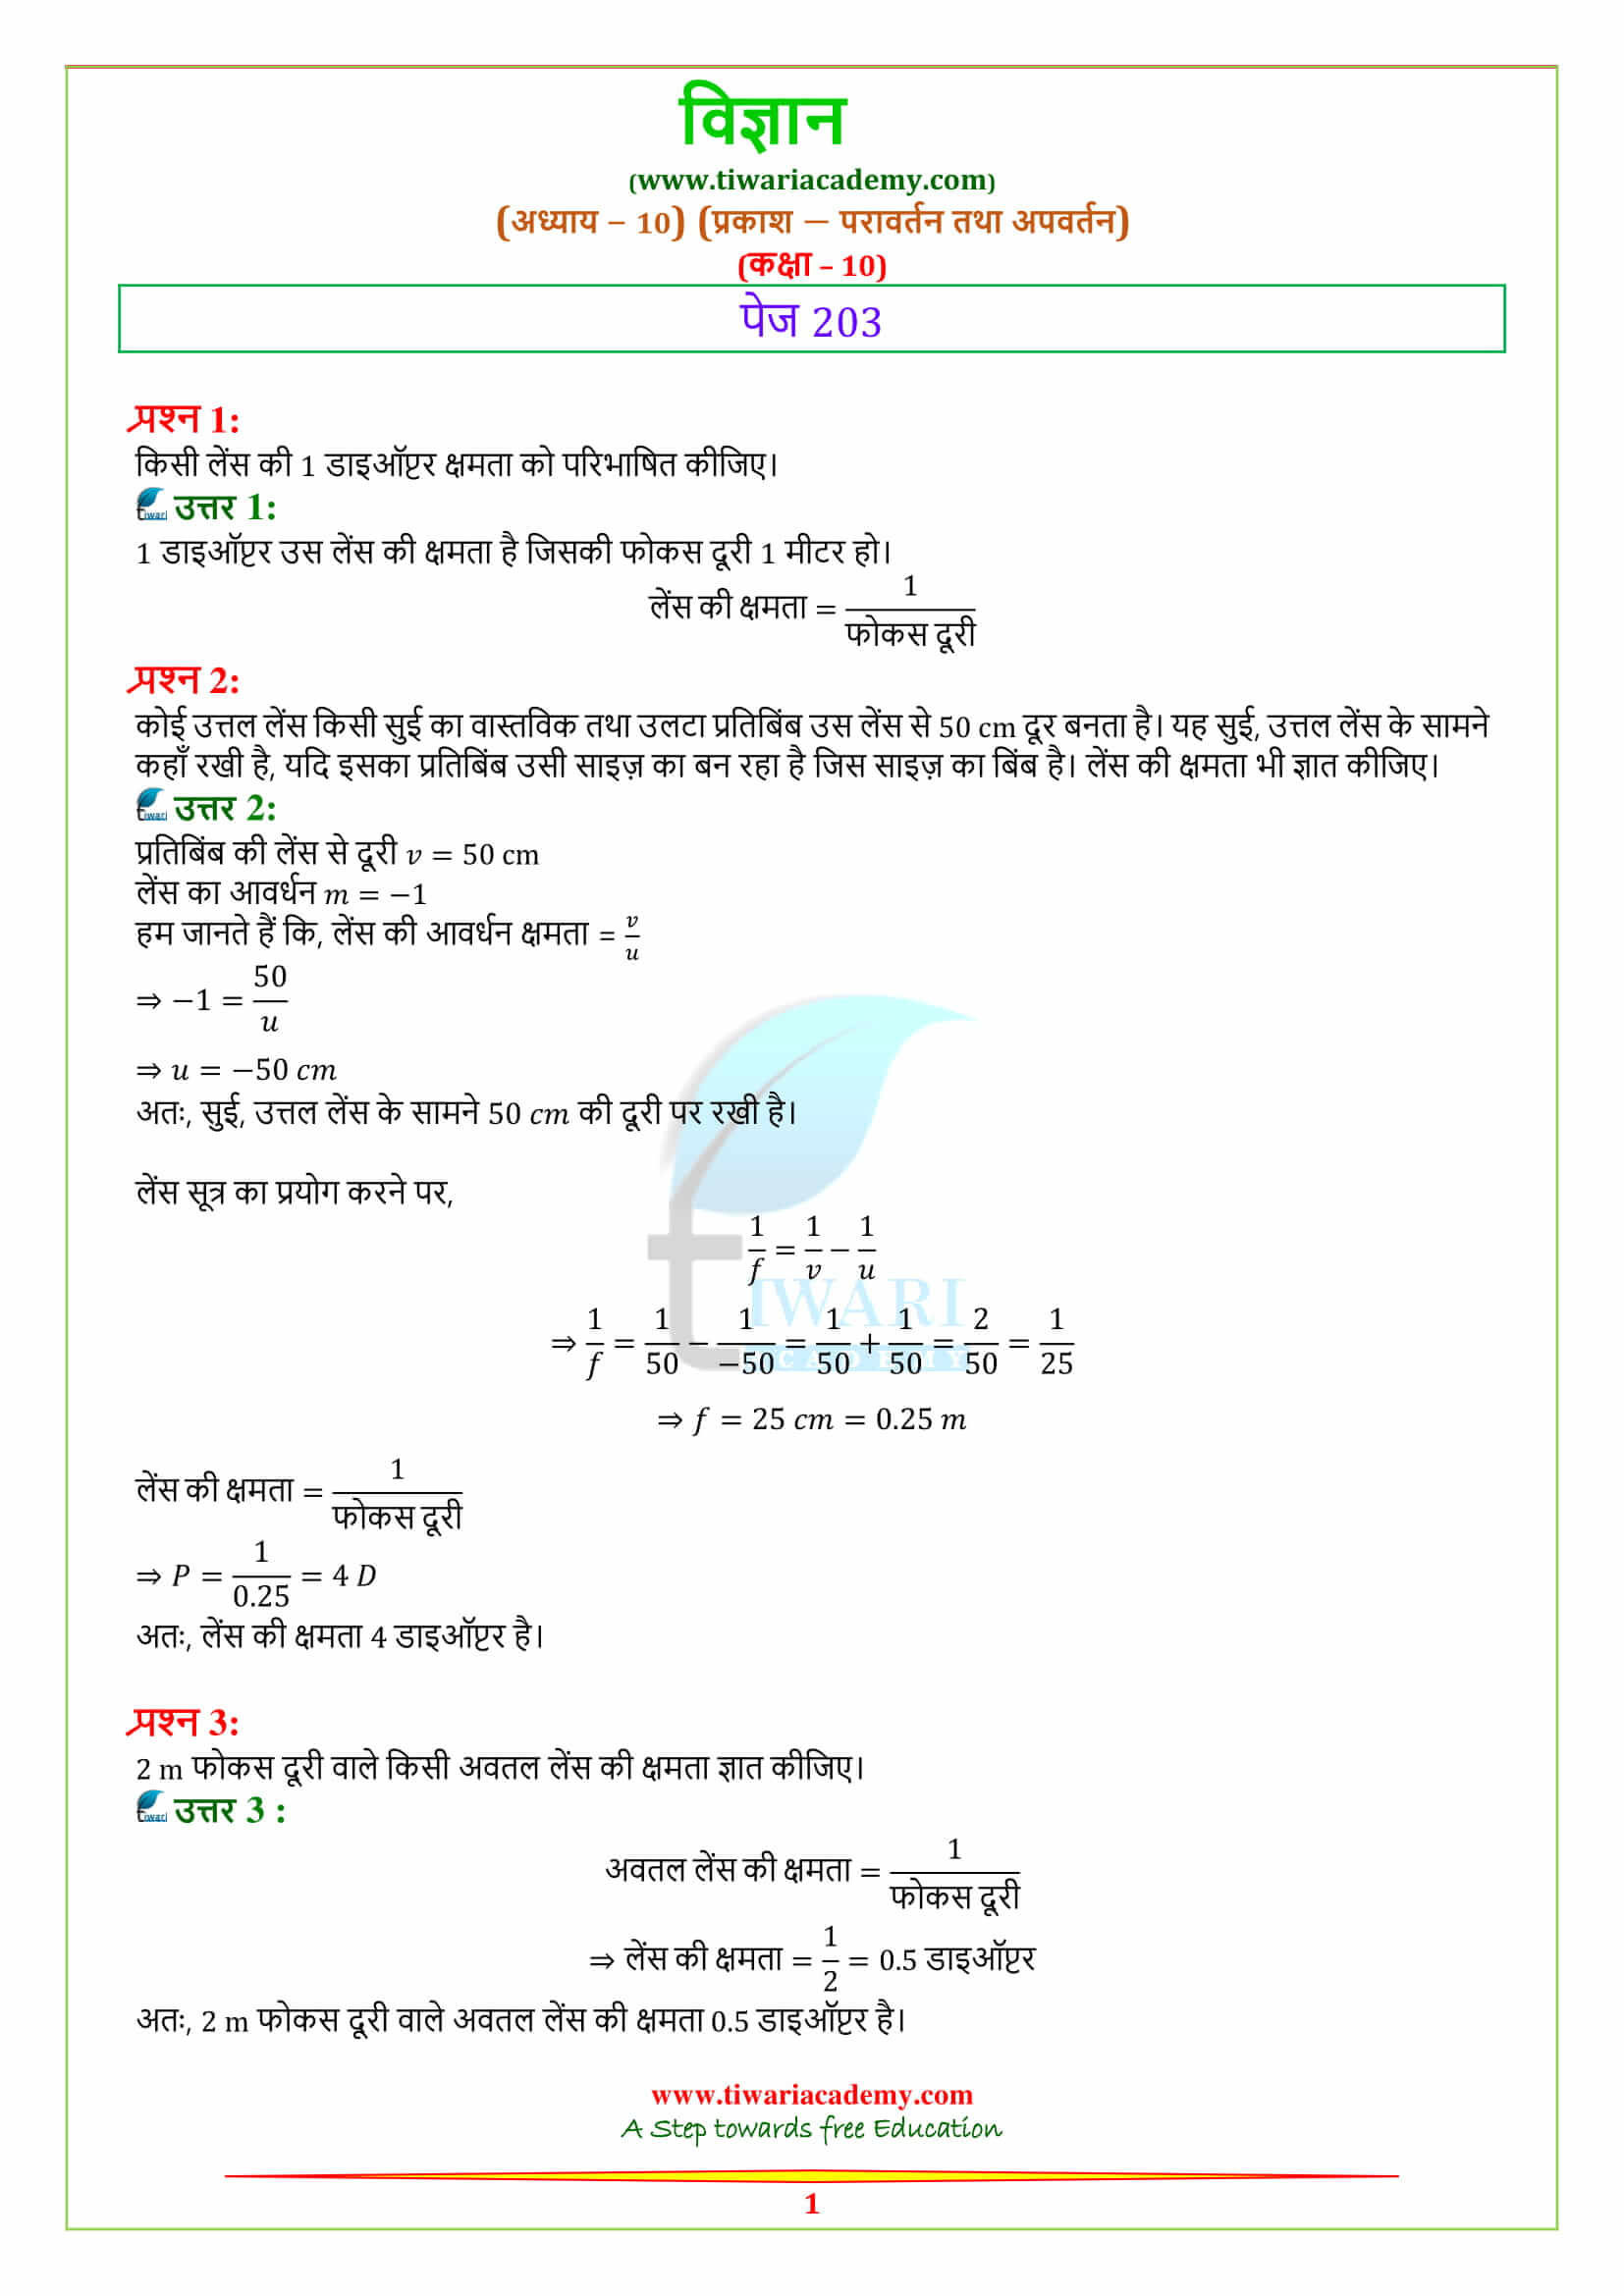 NCERT Solutions for Class 10 Light – Reflection and Refraction Intext questions on page 203